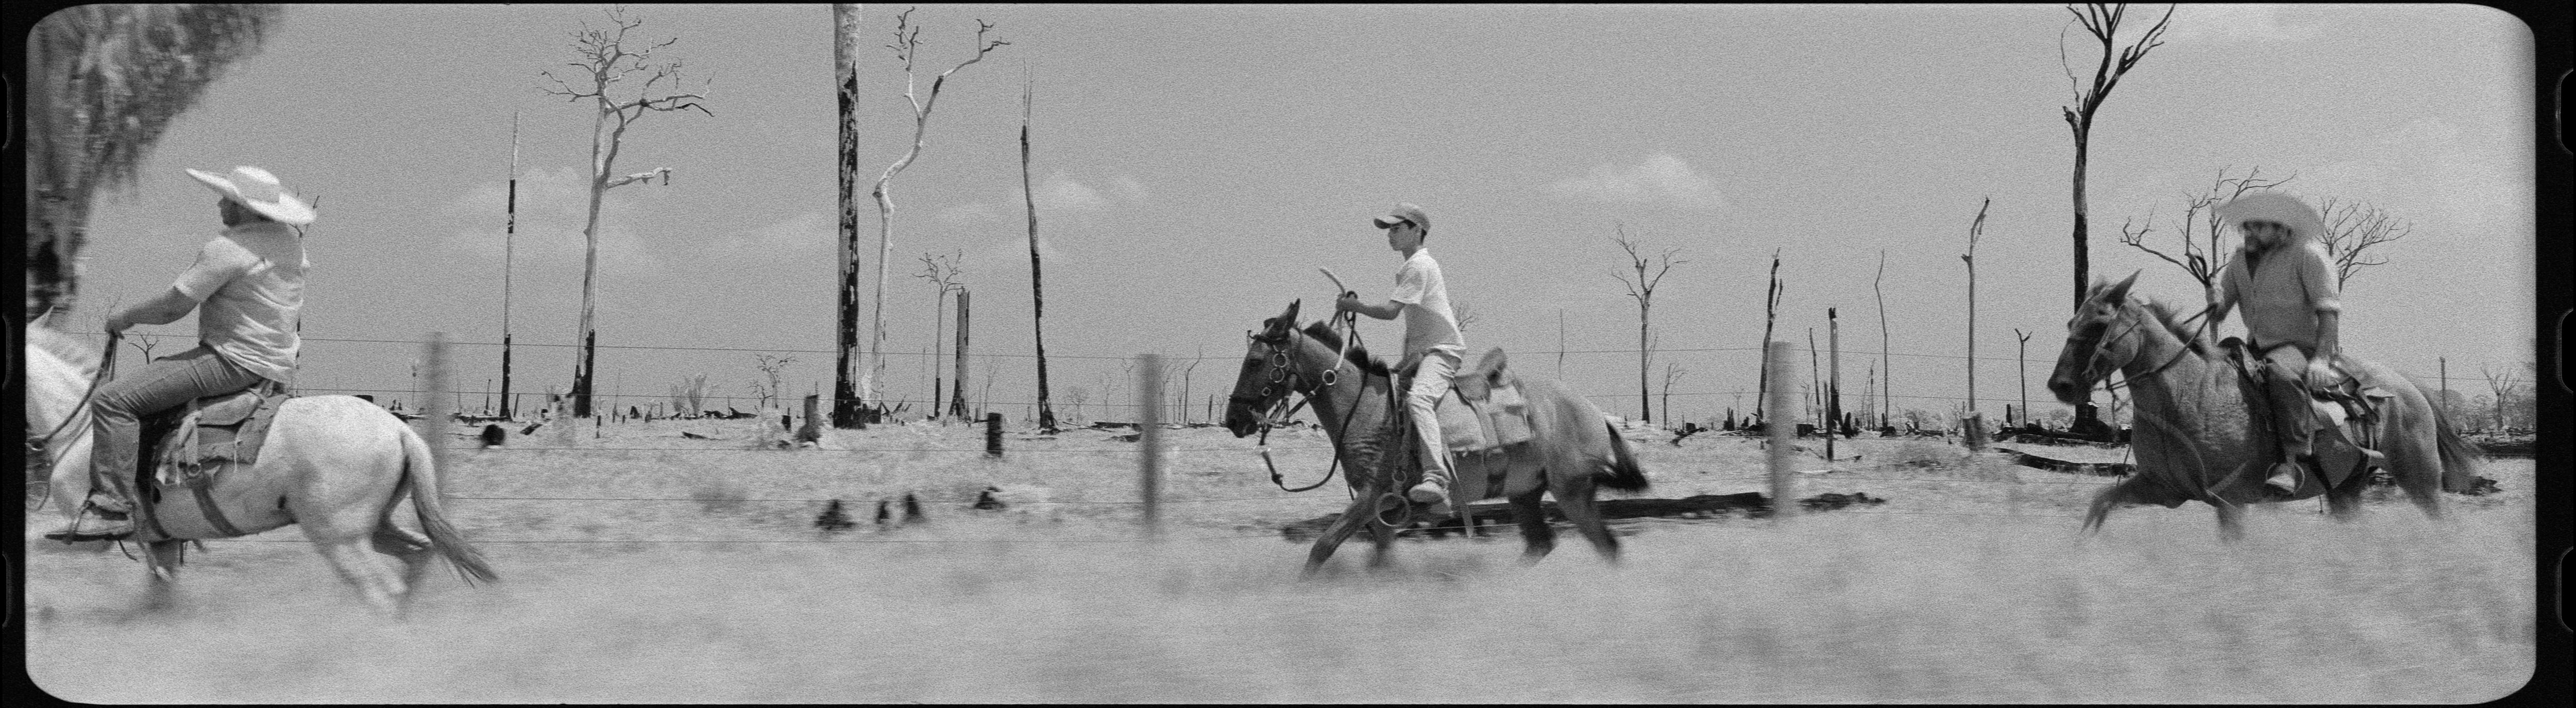 A black and white still from a video artwork featuring three men in cowboy hats riding horses through a barren landscape.